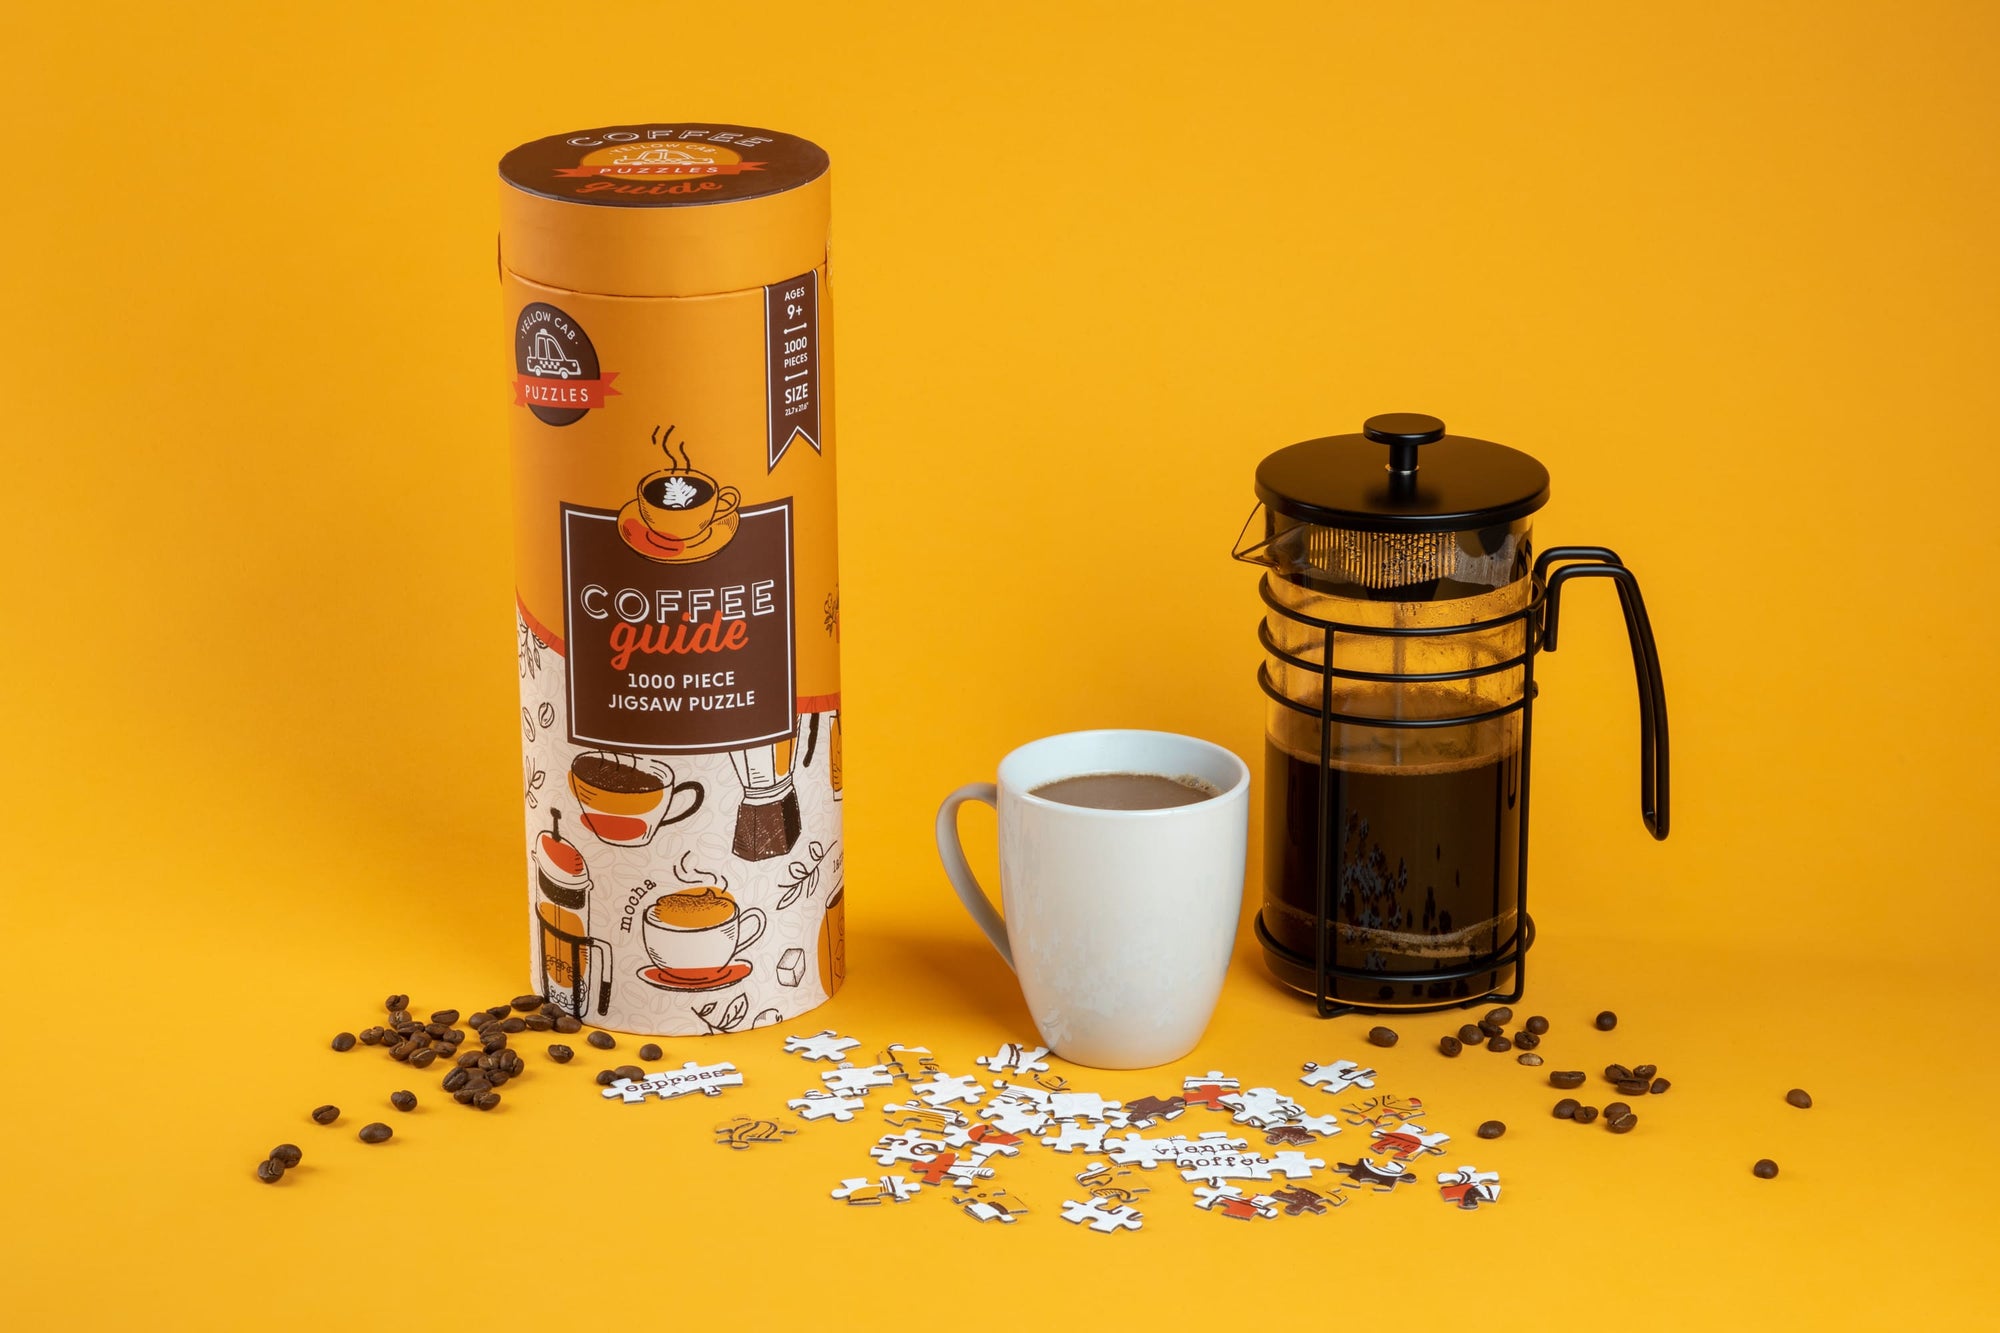 Coffee Guide Jigsaw Puzzle